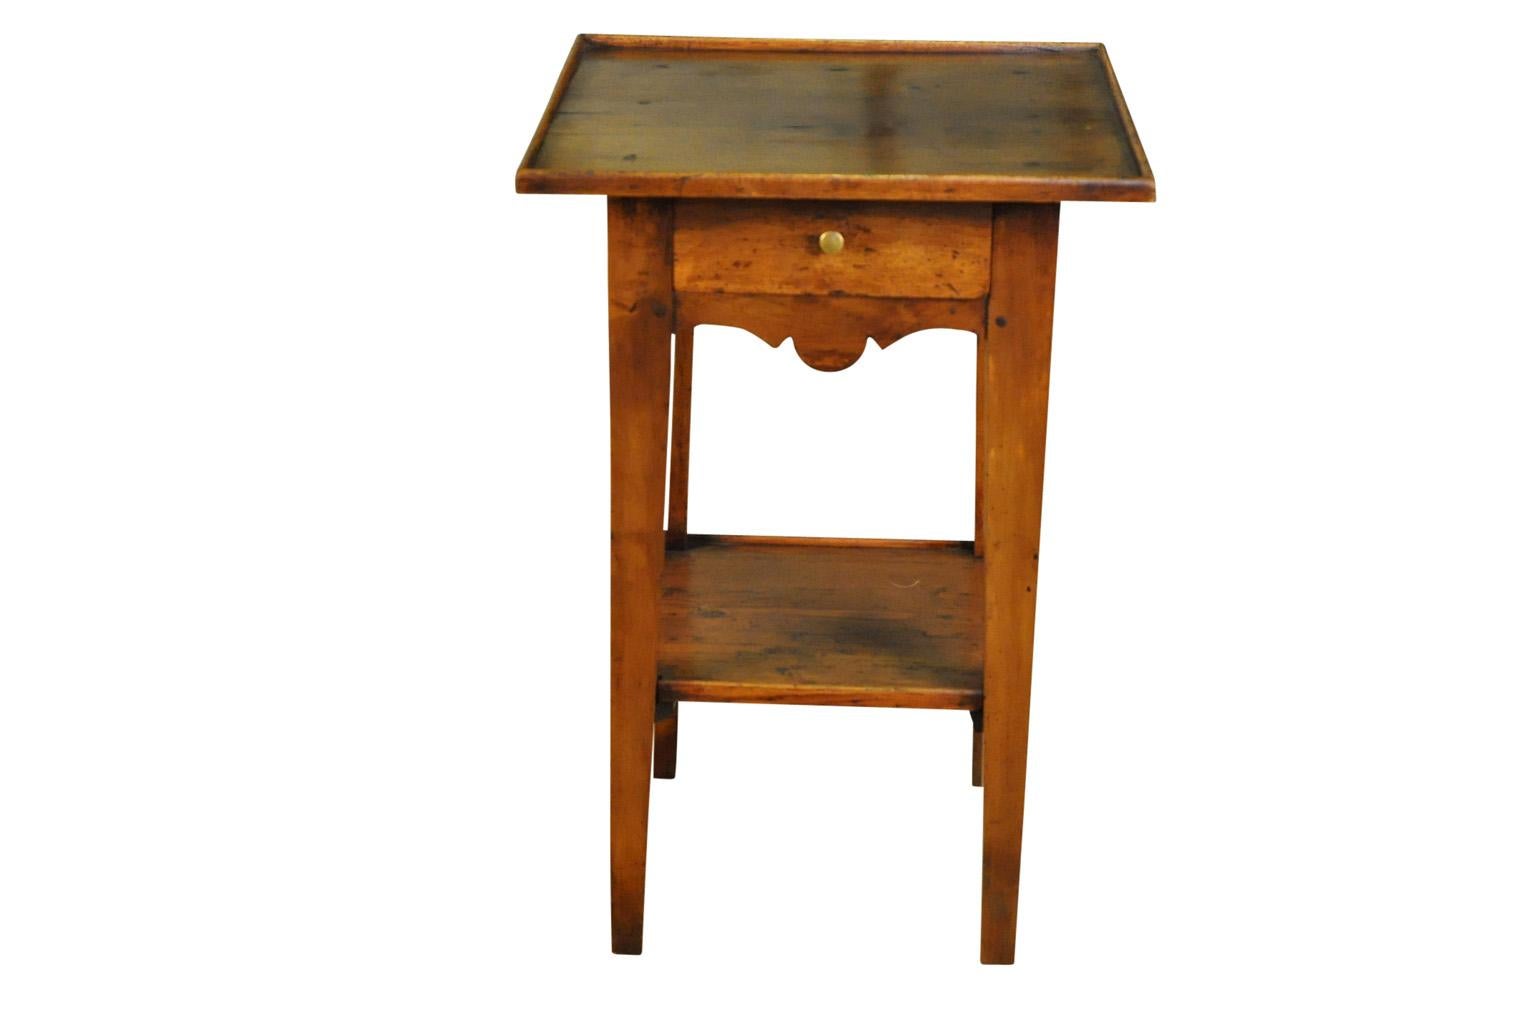 A very beautiful French Directoire period side table. Wonderfully constructed from stunning walnut. Fabulous graining and sumptuous patina.